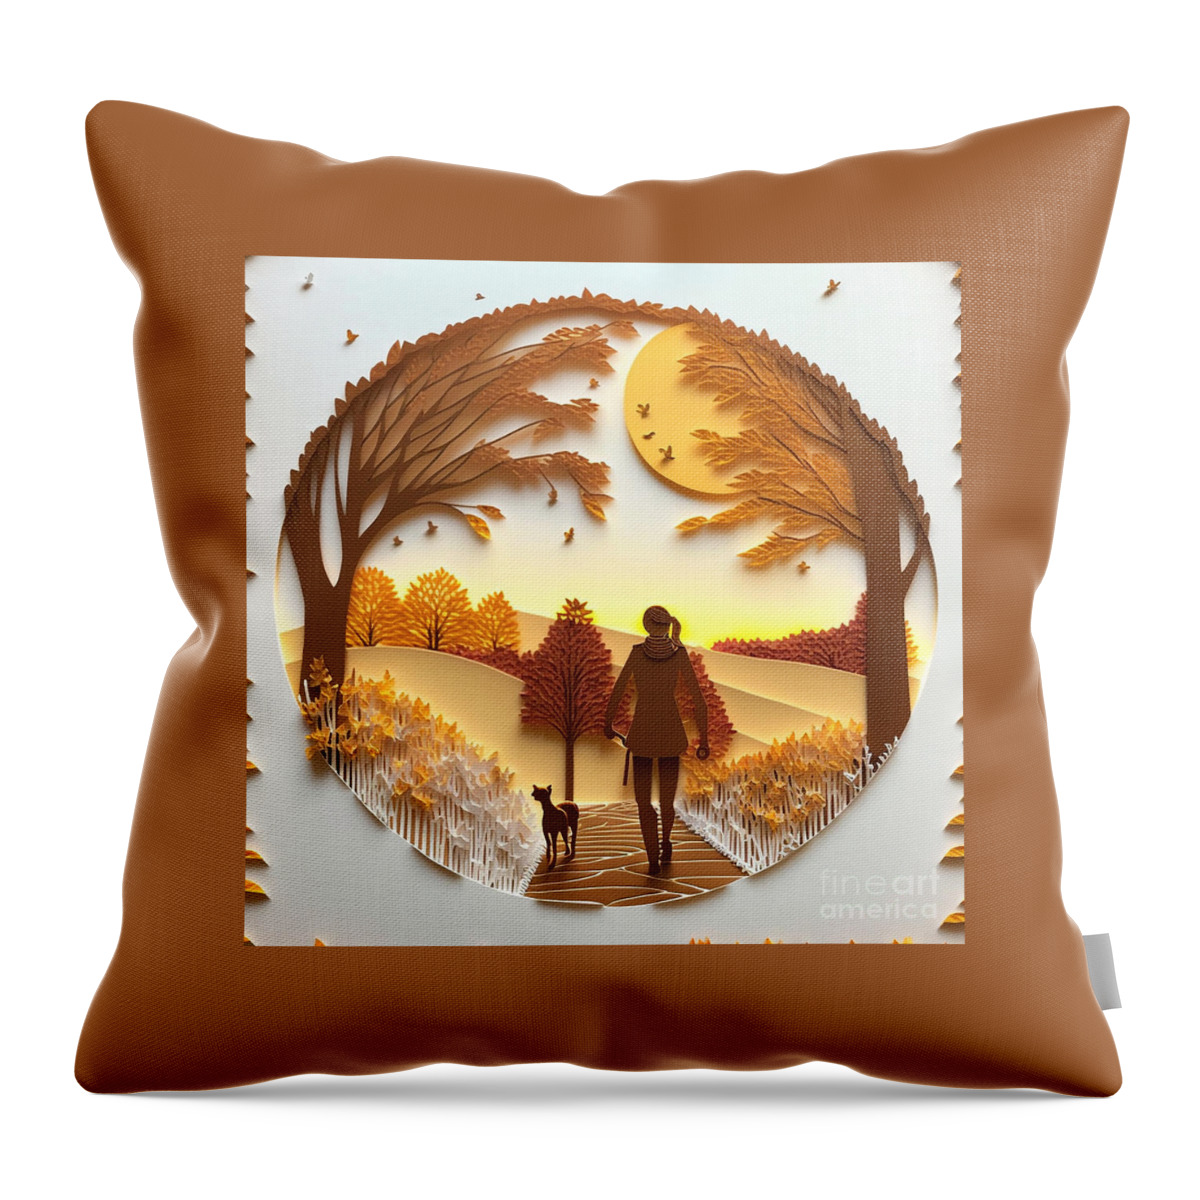 Morning Walk - Quilling Throw Pillow featuring the mixed media Morning Walk - Quilling by Jay Schankman